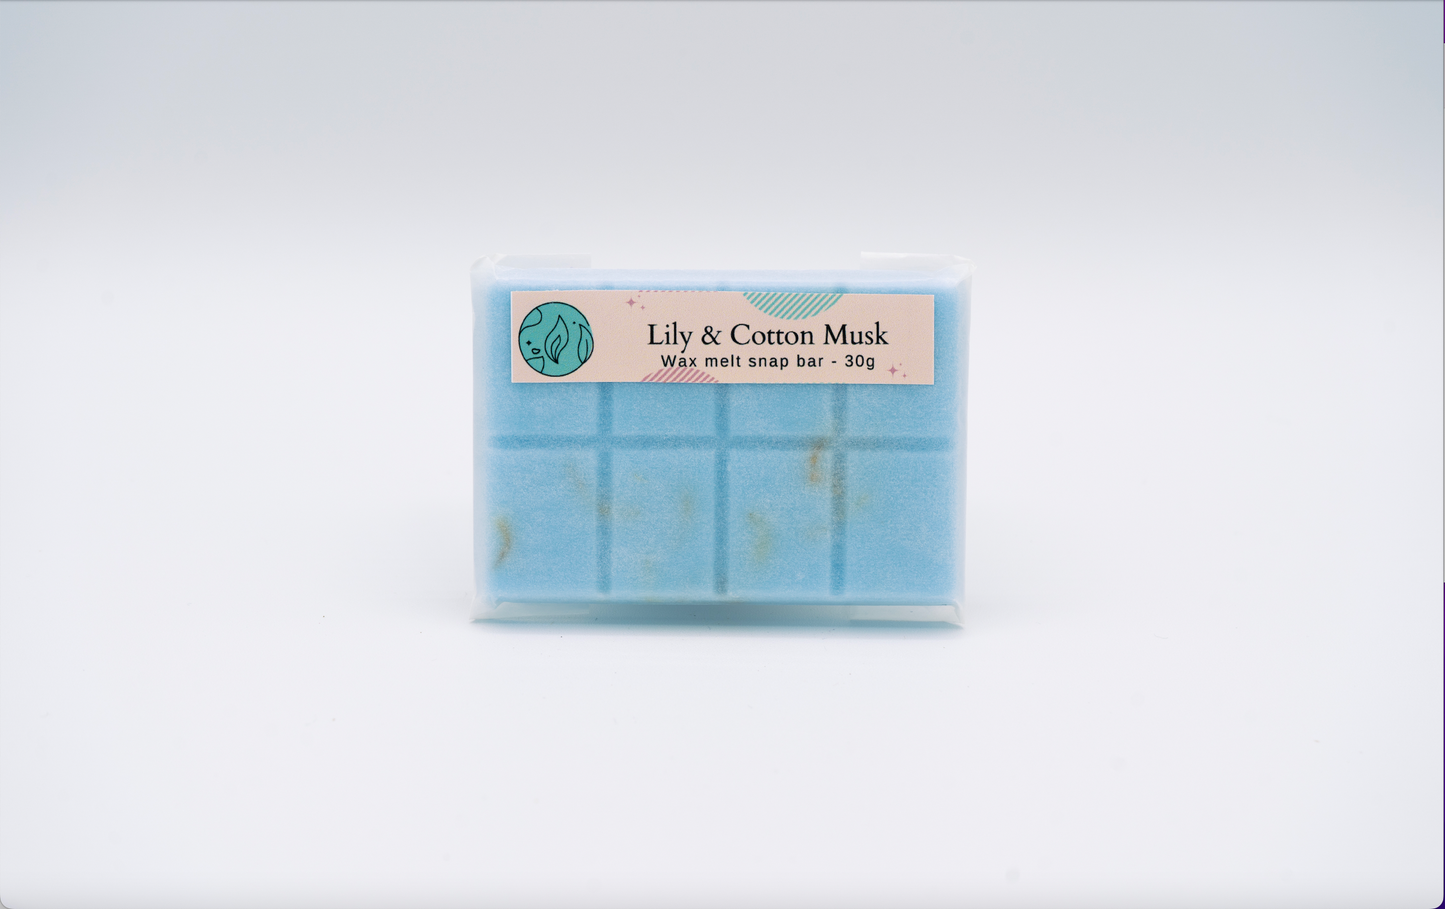 Delicate Lily and cotton musk fragranced 30g or 90g strongly scented wax melt snap bars. Eco friendly waxed paper packaging. Brighton Rock Workshop wax melts made in Spain and the United Kingdom, available in two sizes. Suitable for tea light or electric burners